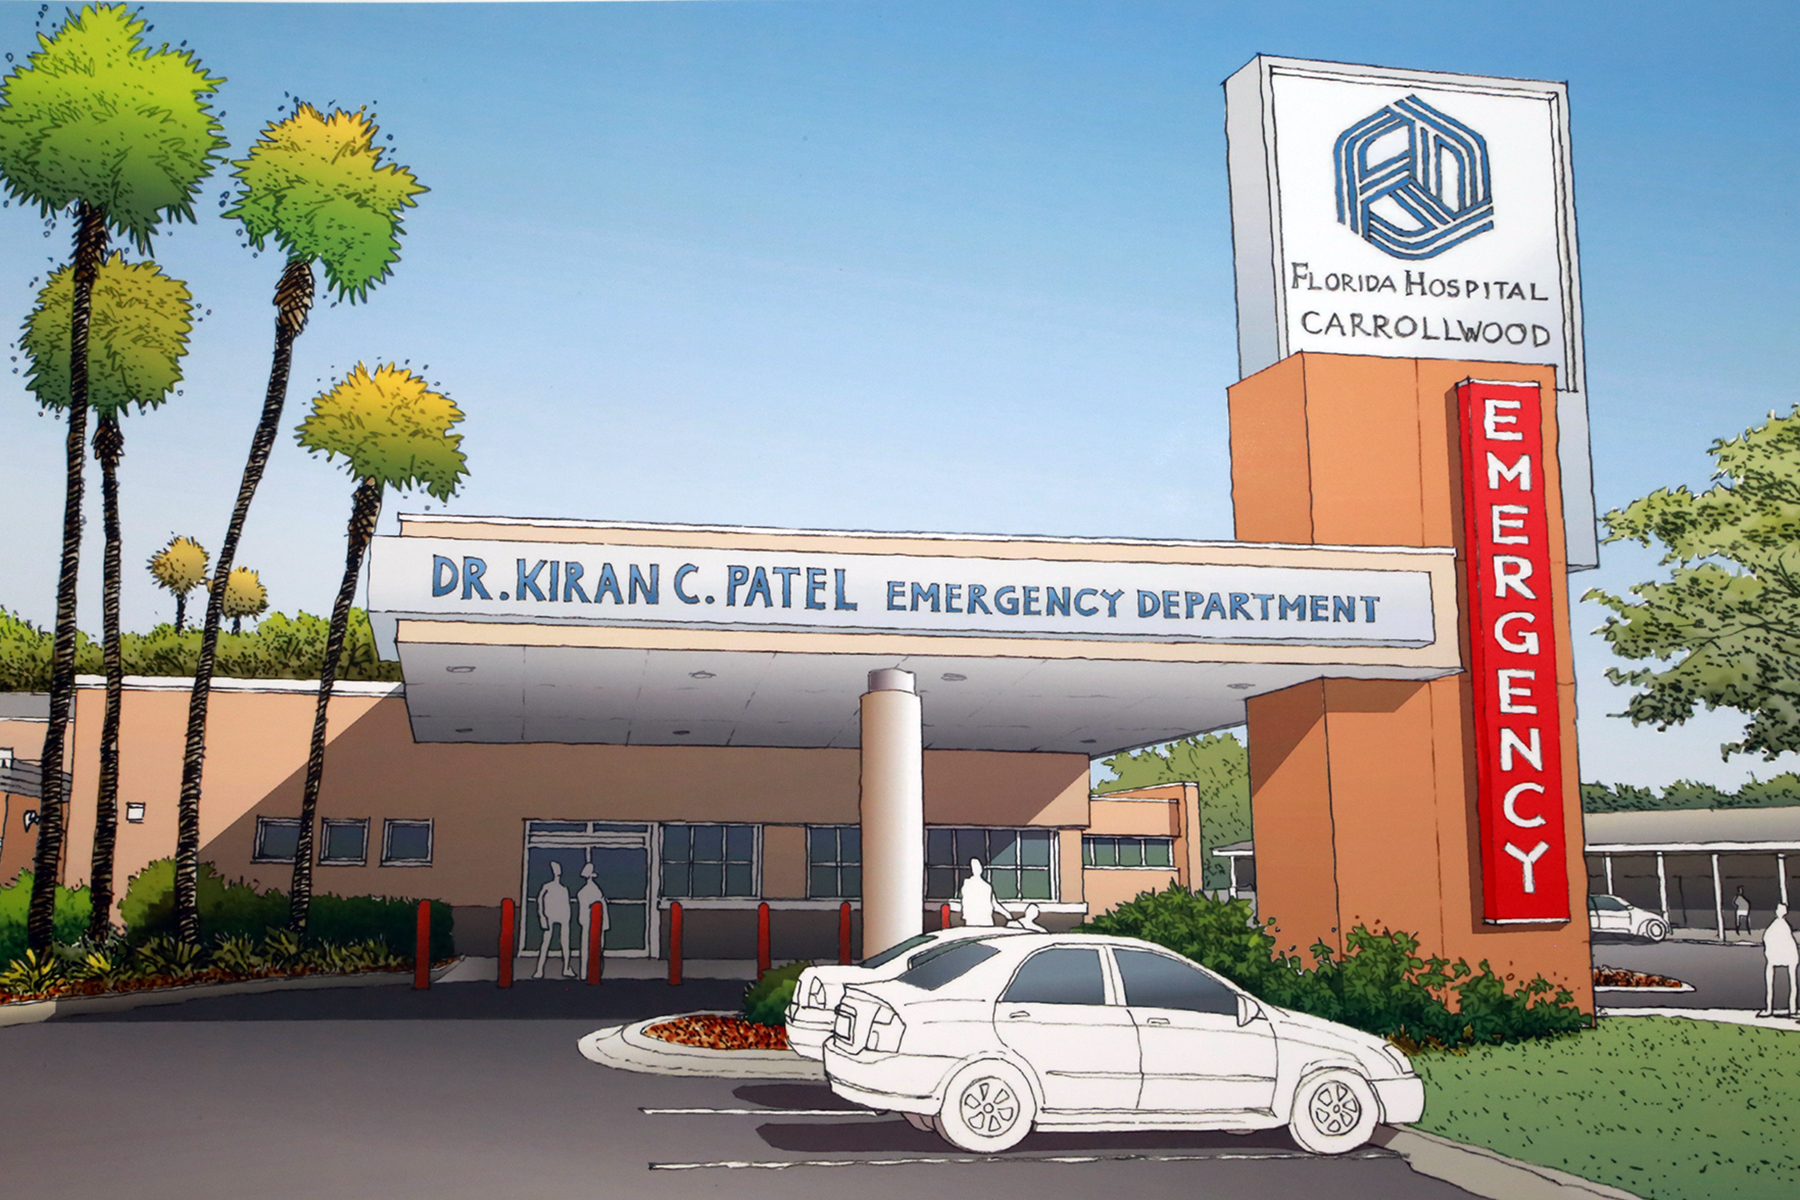 Rendering of the new Emergency Department Expansion at Florida Hospital Carrollwood